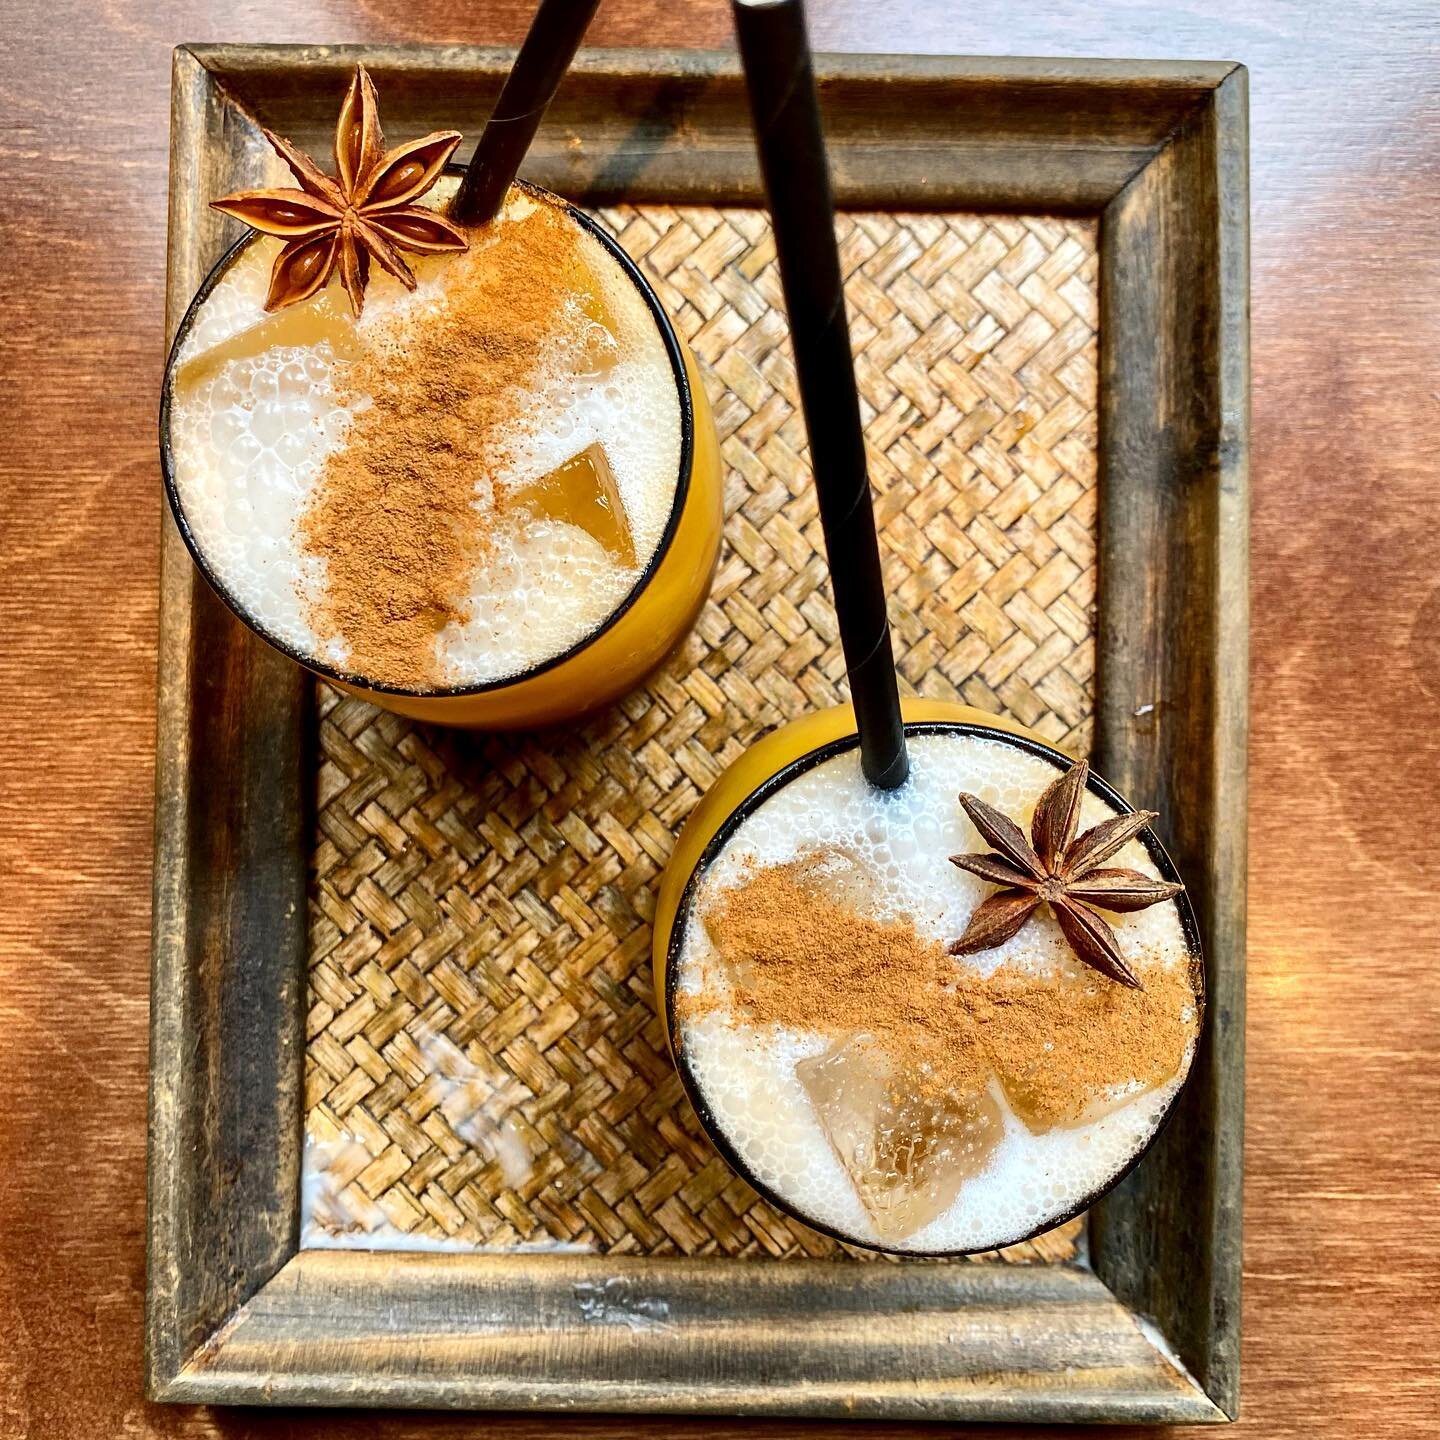 Love from our Coconut Chai Latte &hearts;️🌿

Happy Sunday! 

https://www.kindeum.com/
.
.
.
.
.
#architecture #art #artisan #plants #coconut #healthyeating #thairestaurant #londonrestaurants #ootd #instafood #chai #Thailand #bangkok #delicious #lean